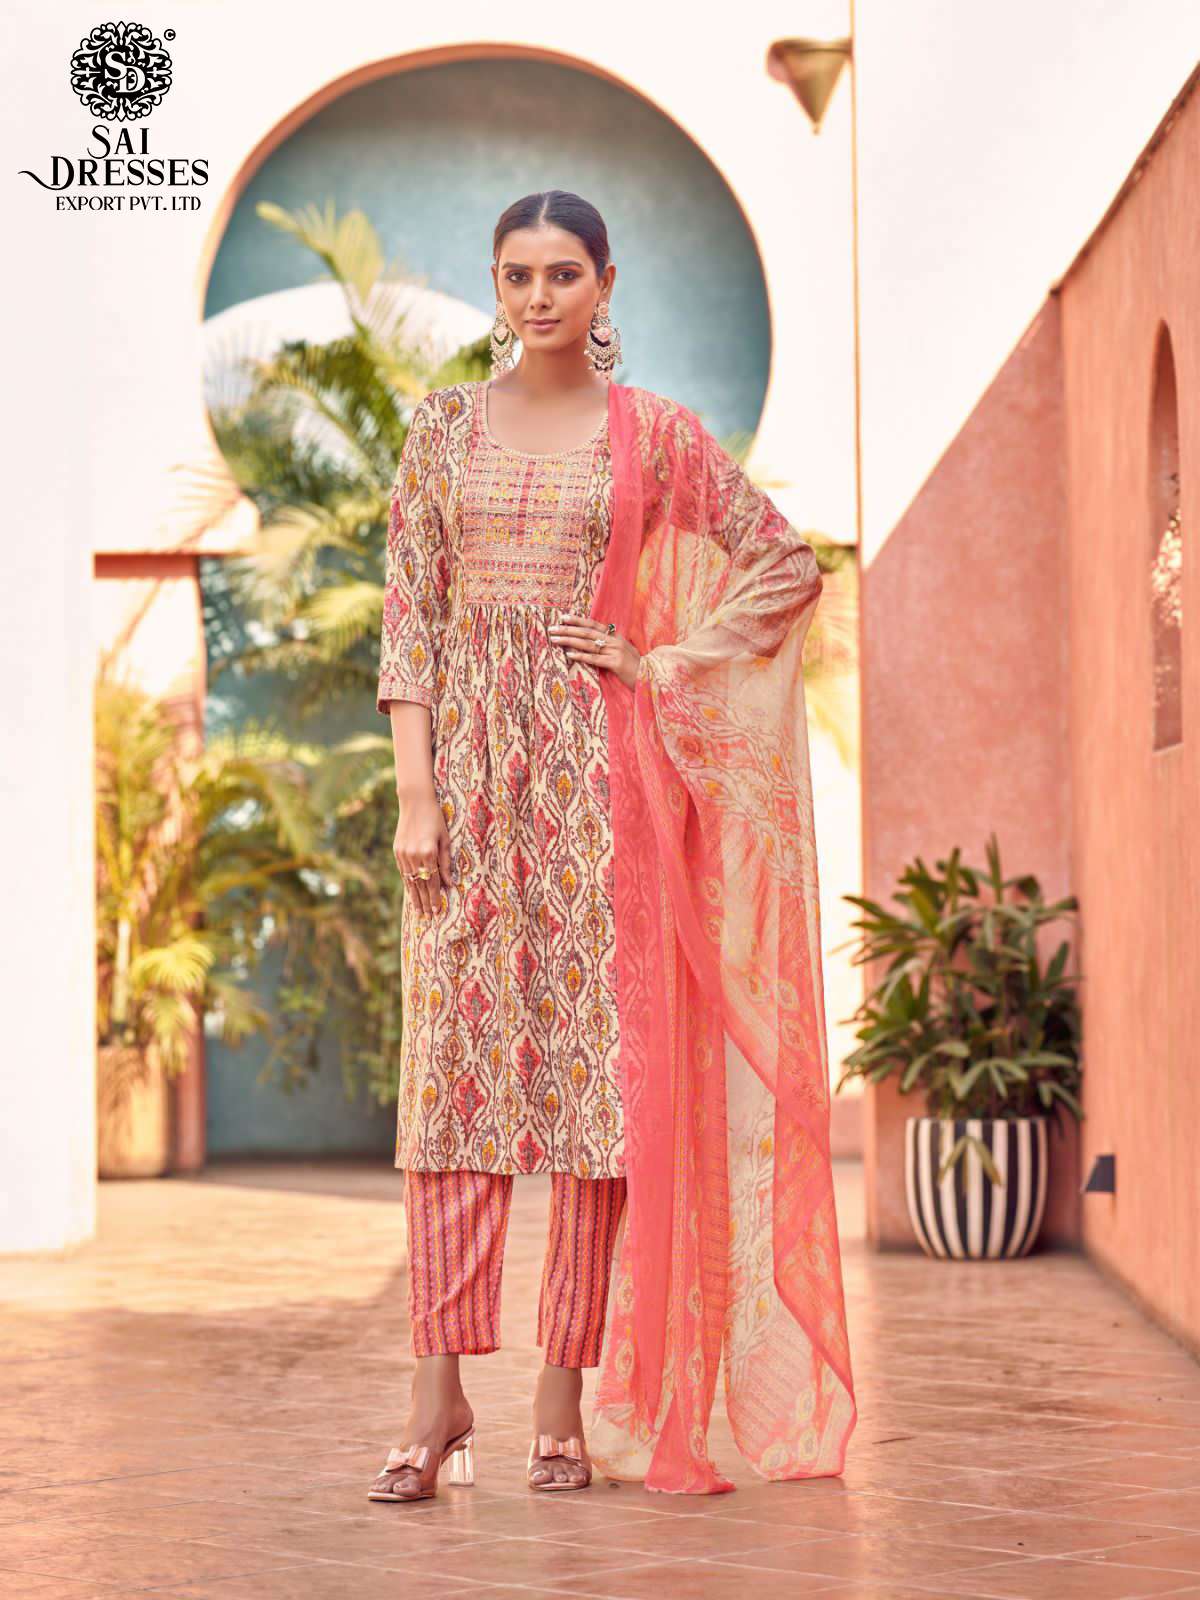 SAI DRESSES PRESENT BRINTON READY TO WEAR NAYRA CUT PANT STYLE DESIGNER SUITS IN WHOLESALE RATE IN SURAT